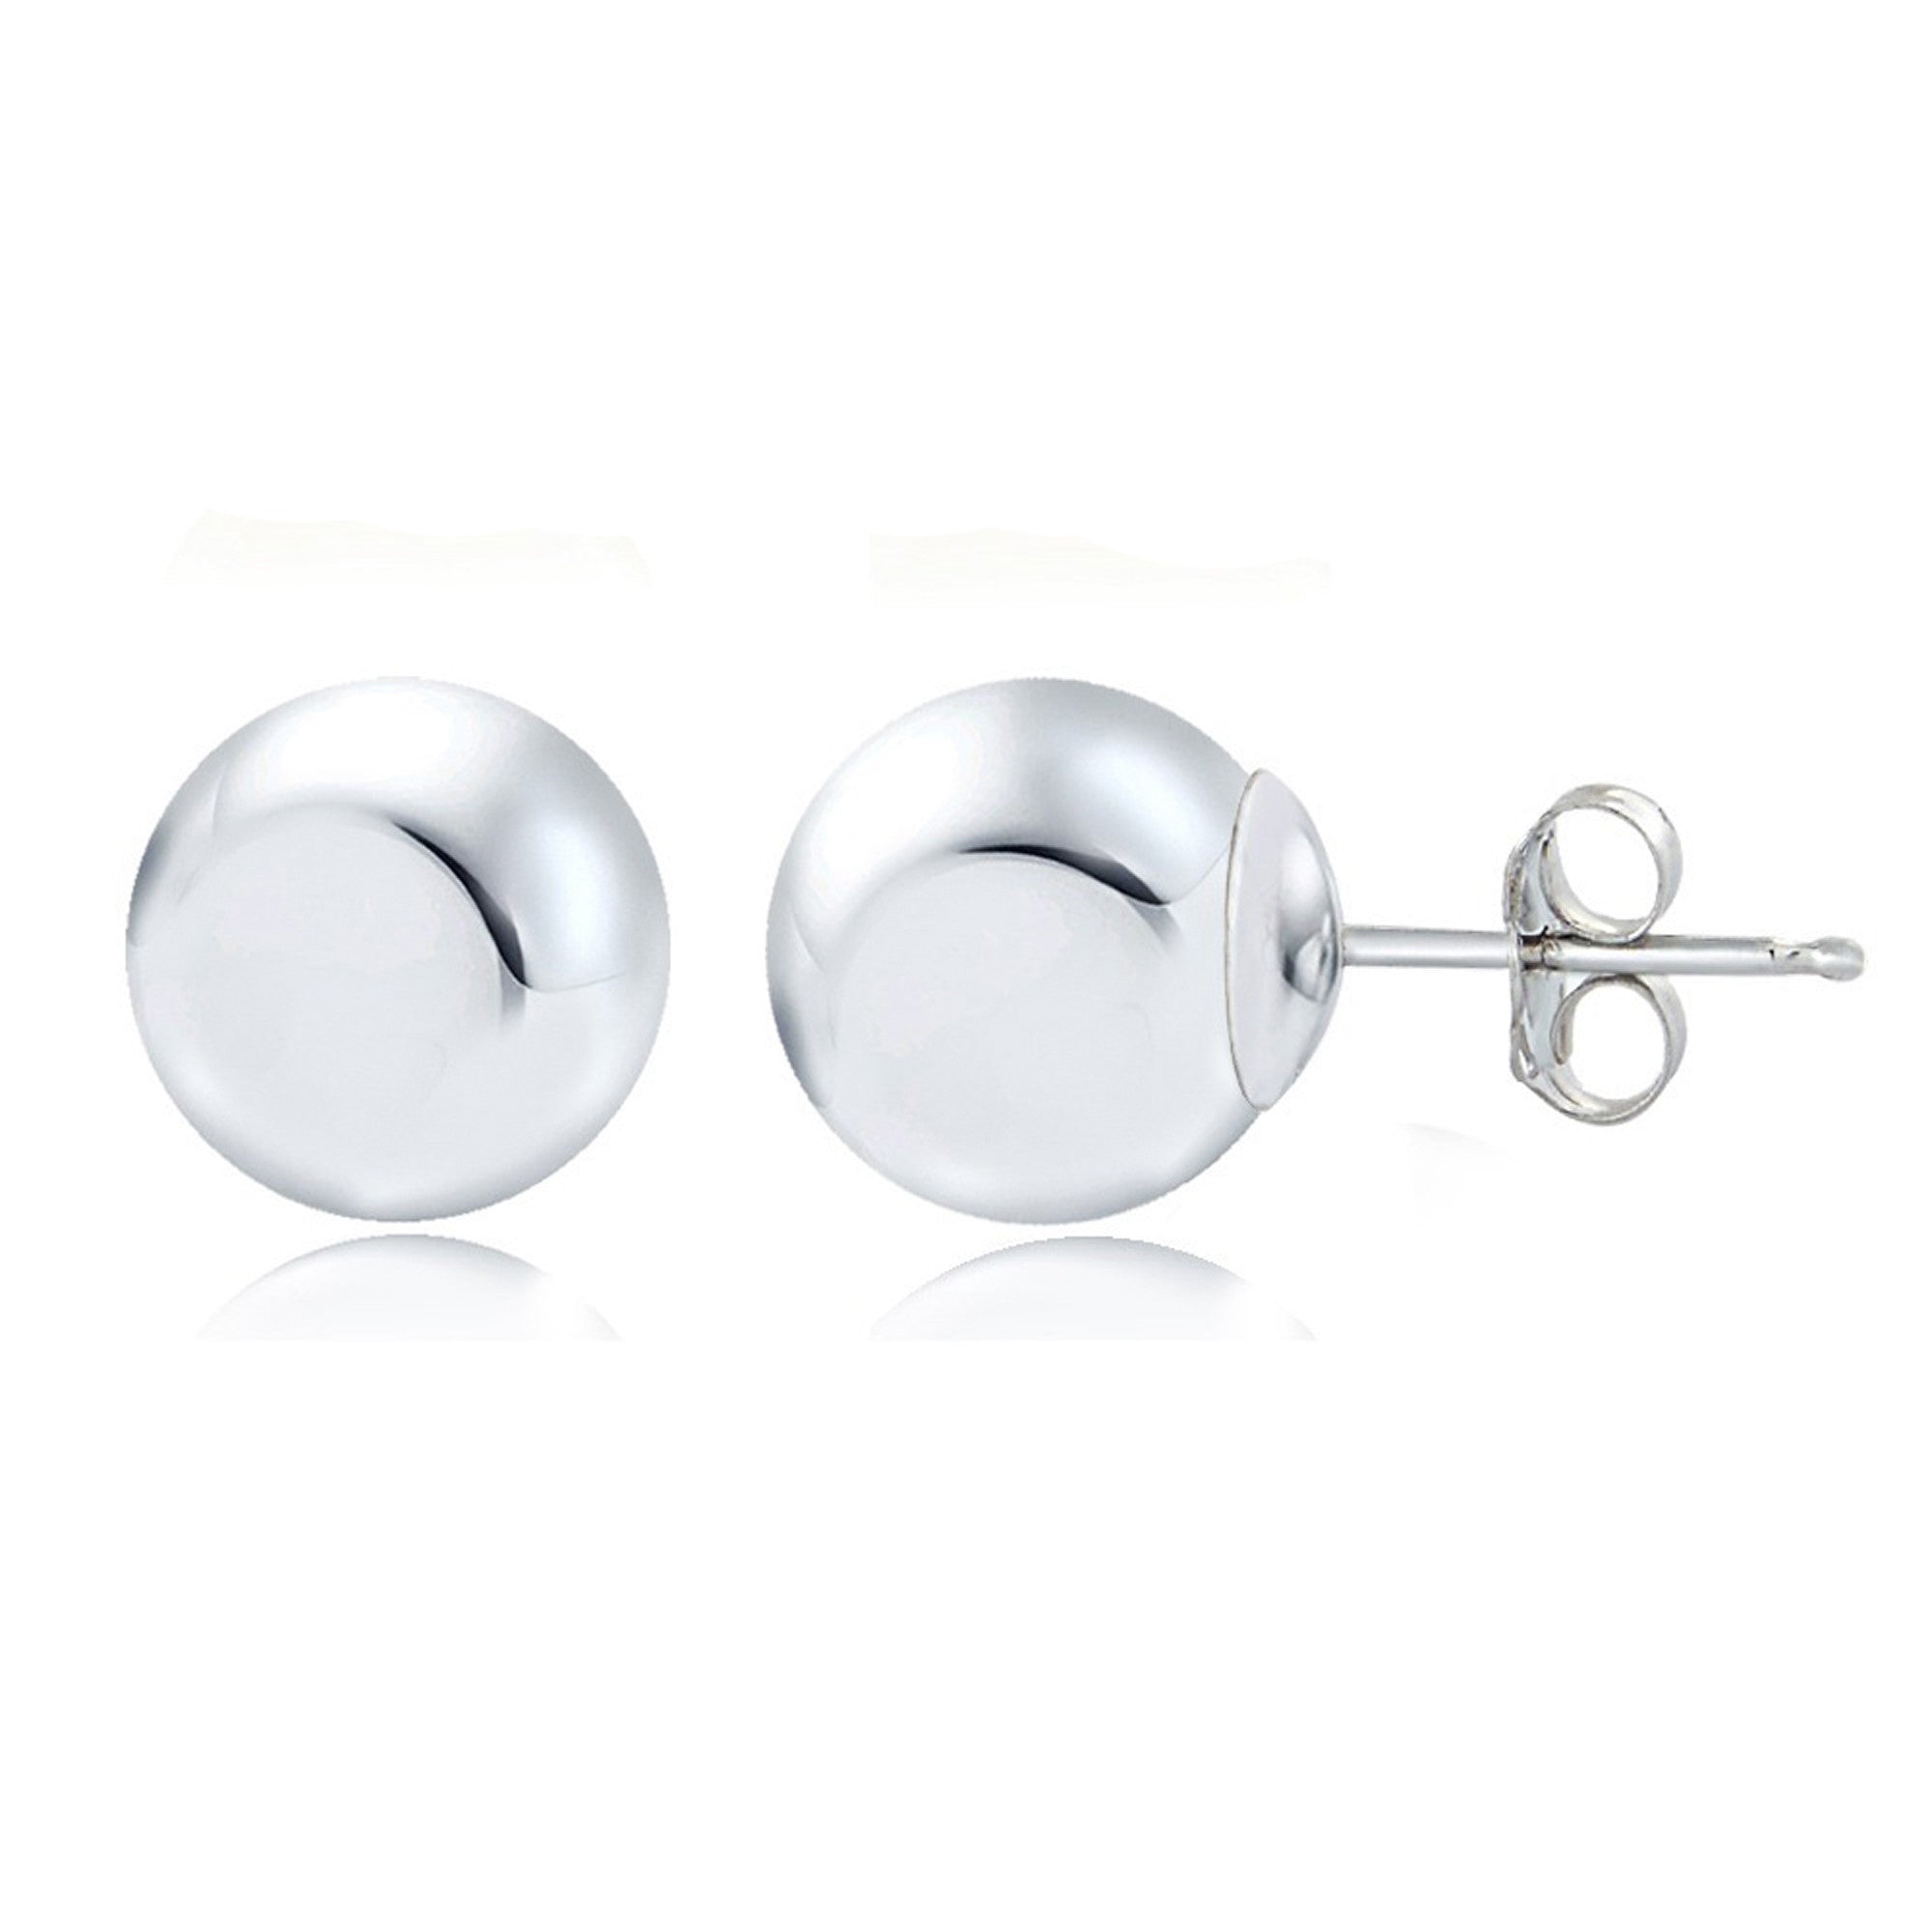 Round Ball Butterfly Clasp Stud Earrings - 10mm White Gold